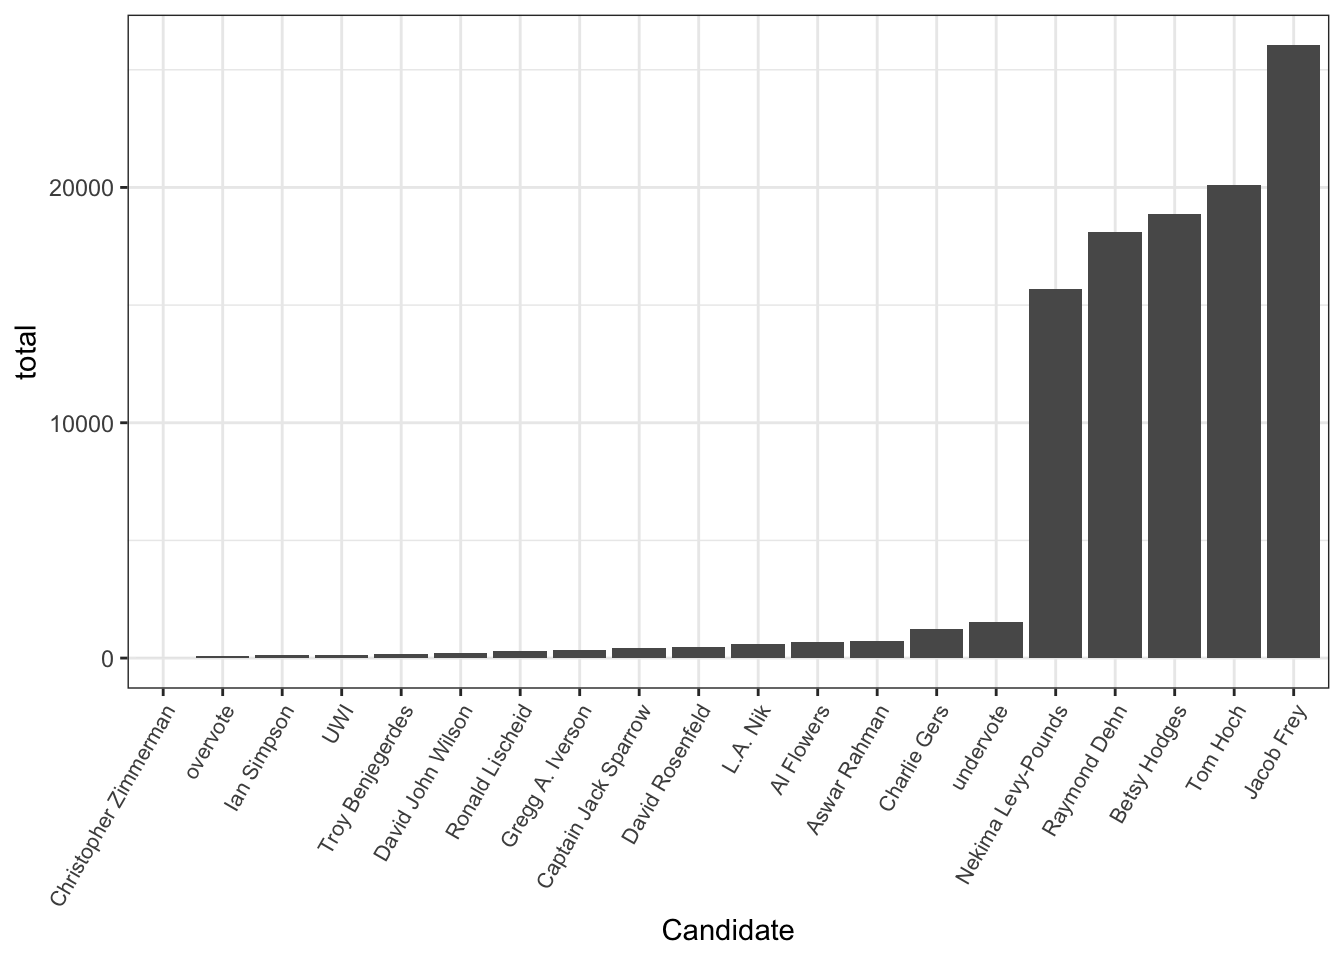 A bar chart showing the number of first-place votes given to each candidate.